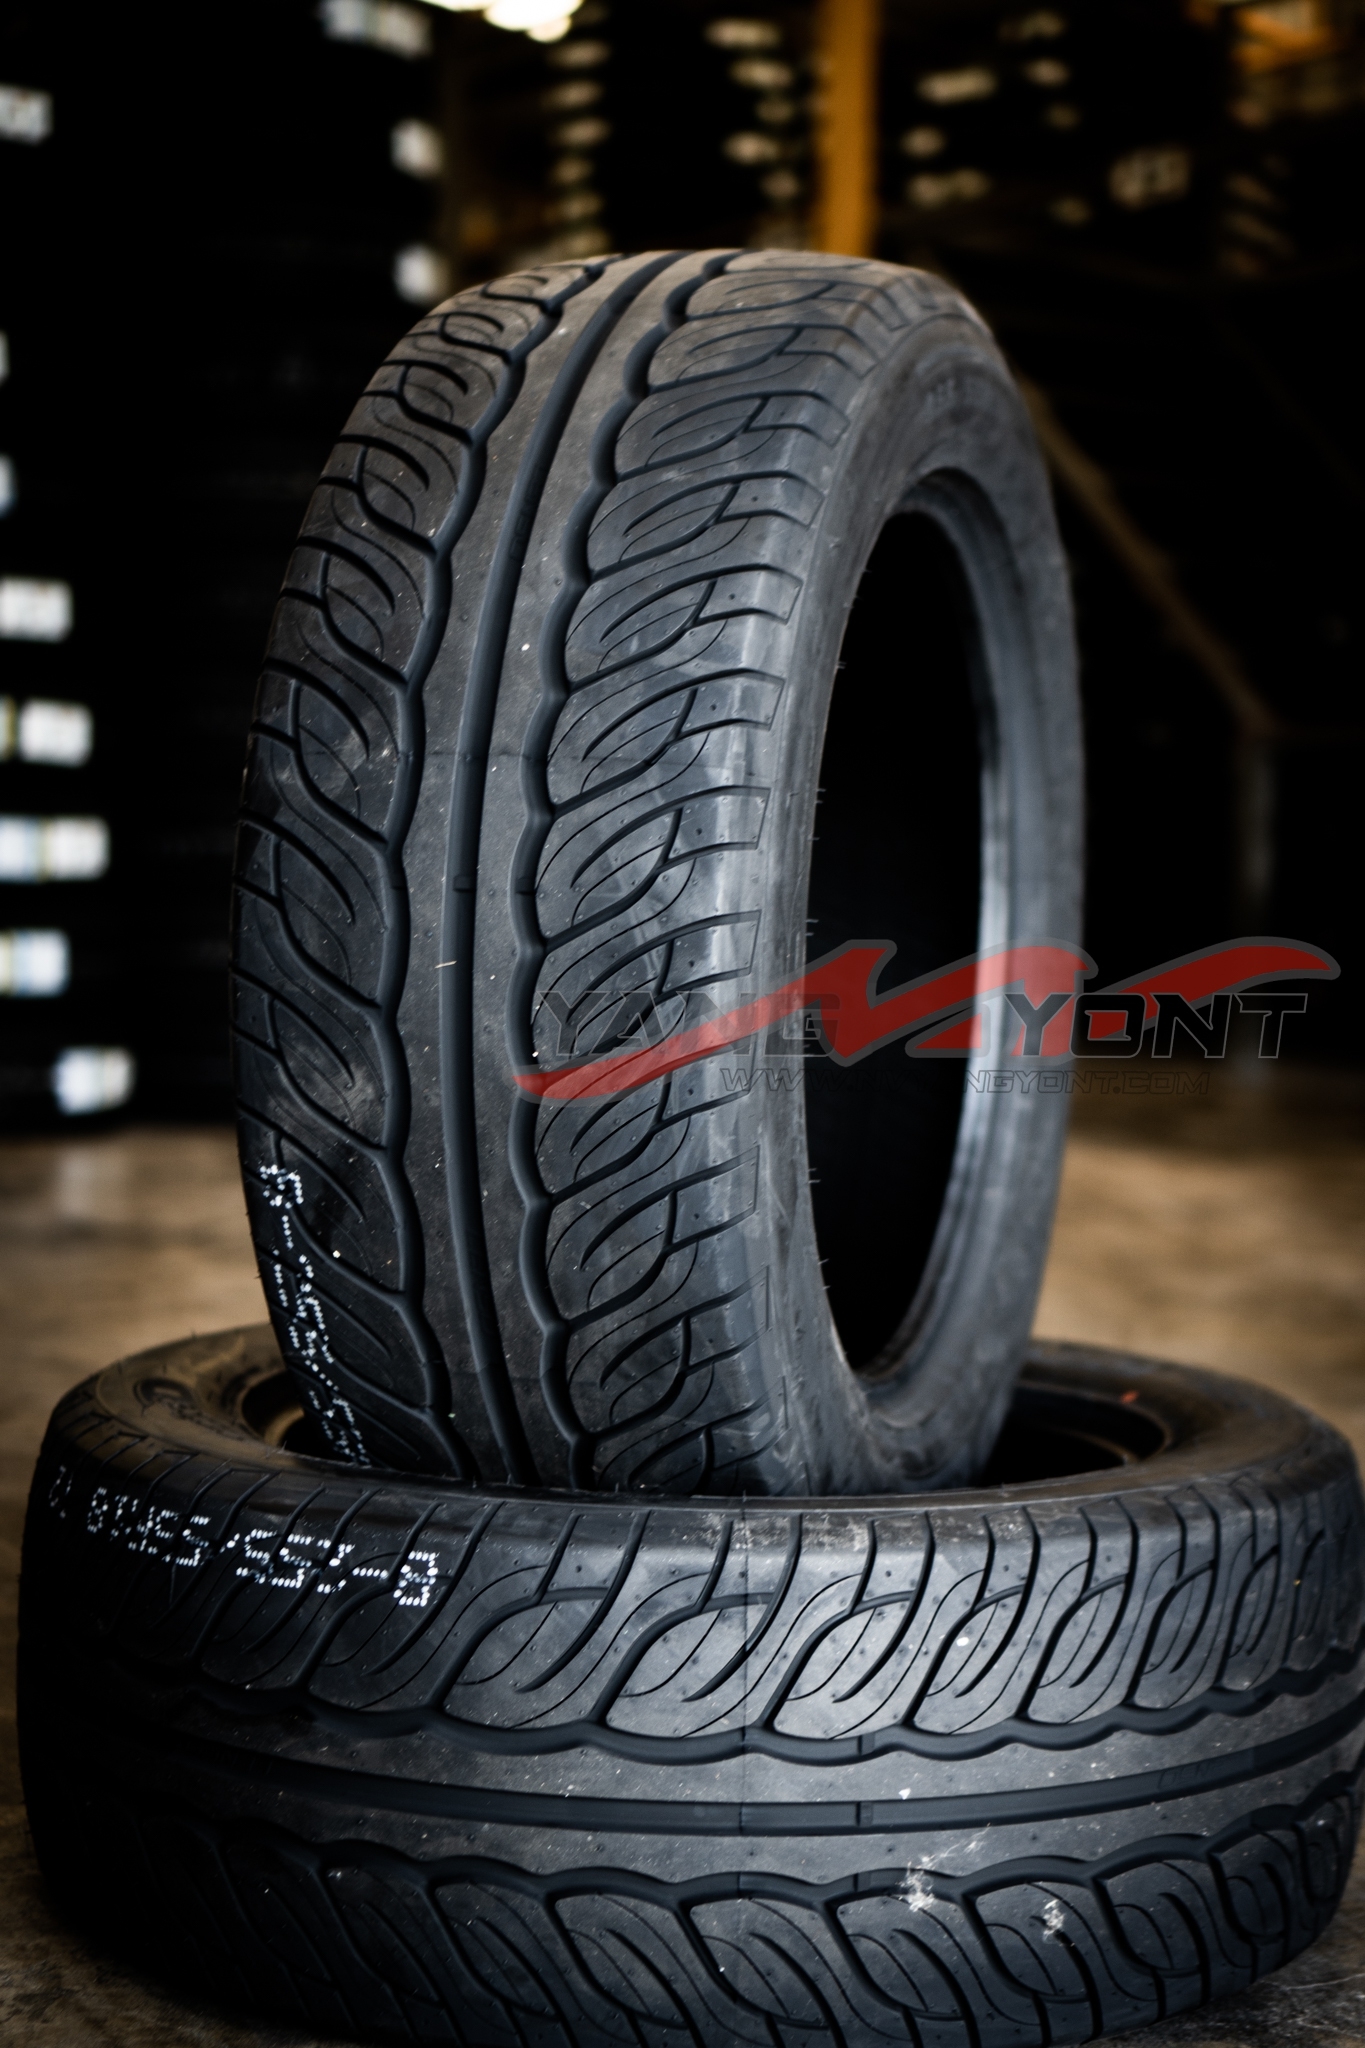 275/40R18 Project D “D-One”